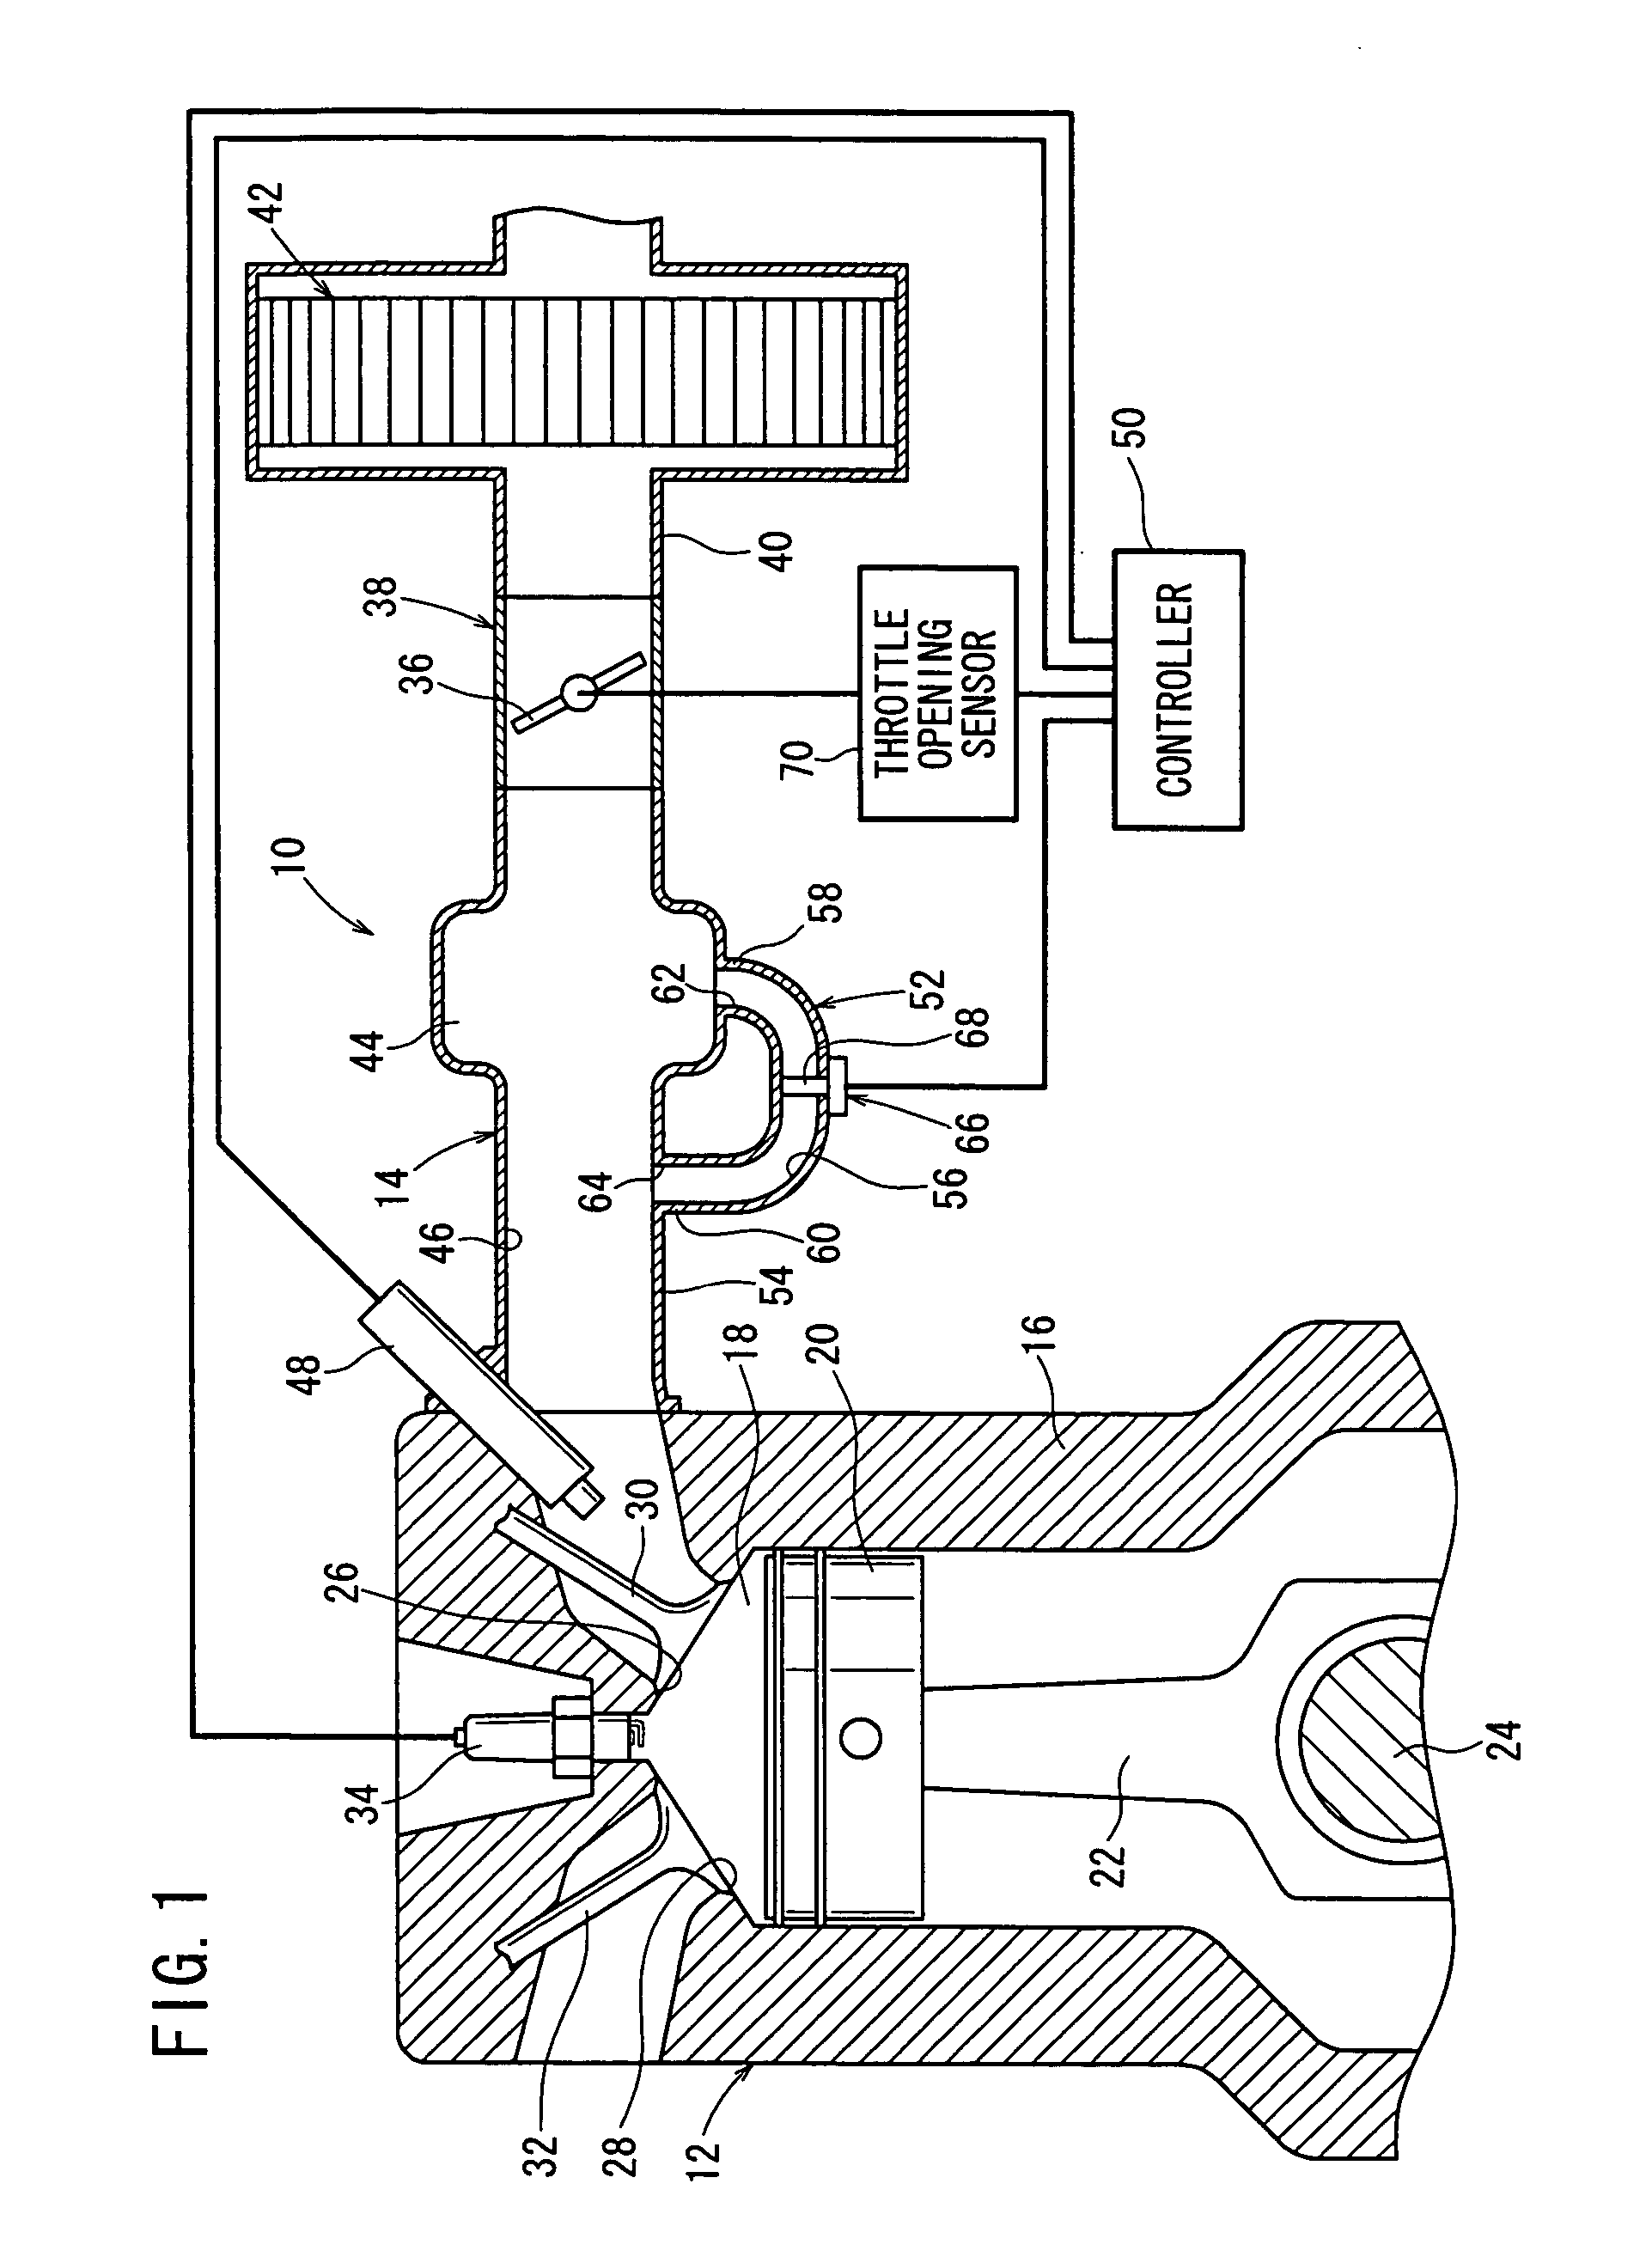 Intake system for internal combustion engine and method of controlling internal combustion engine